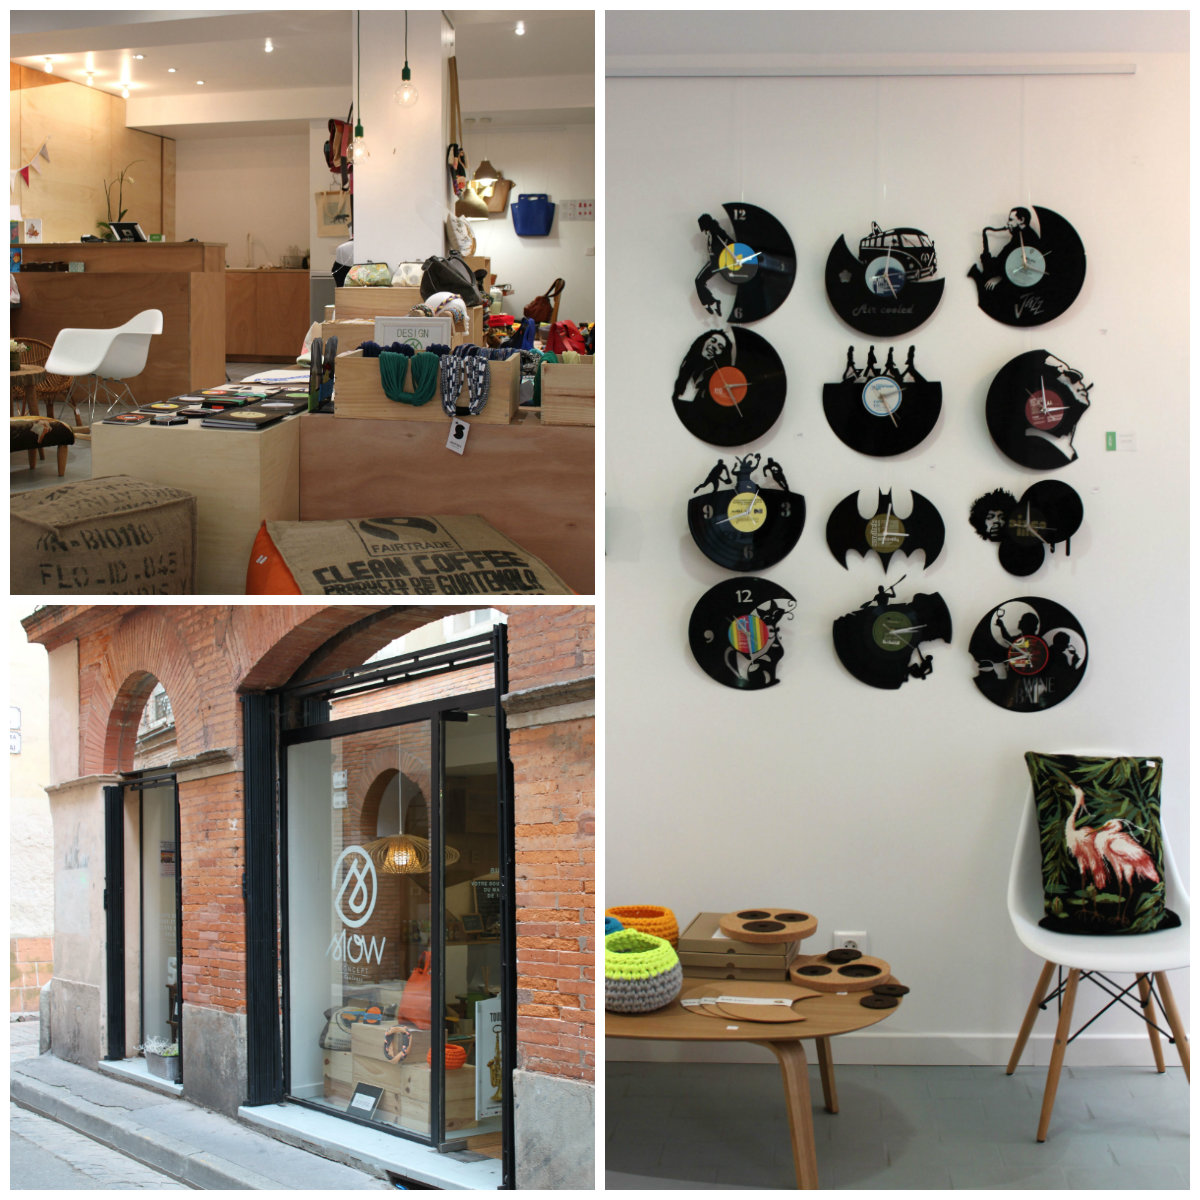 Slow concept store in Toulouse